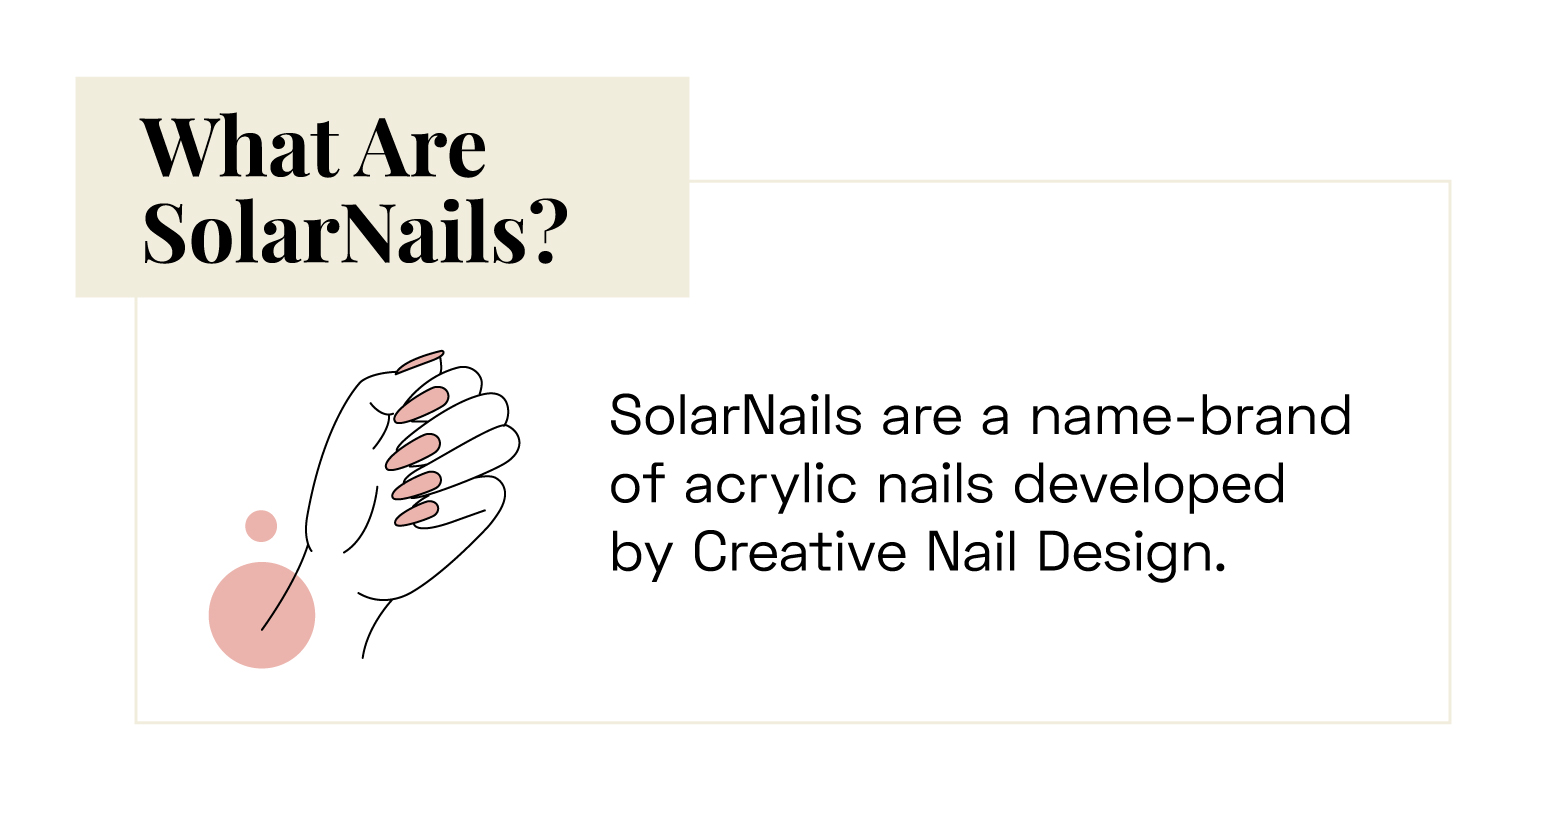 what are solarnails?